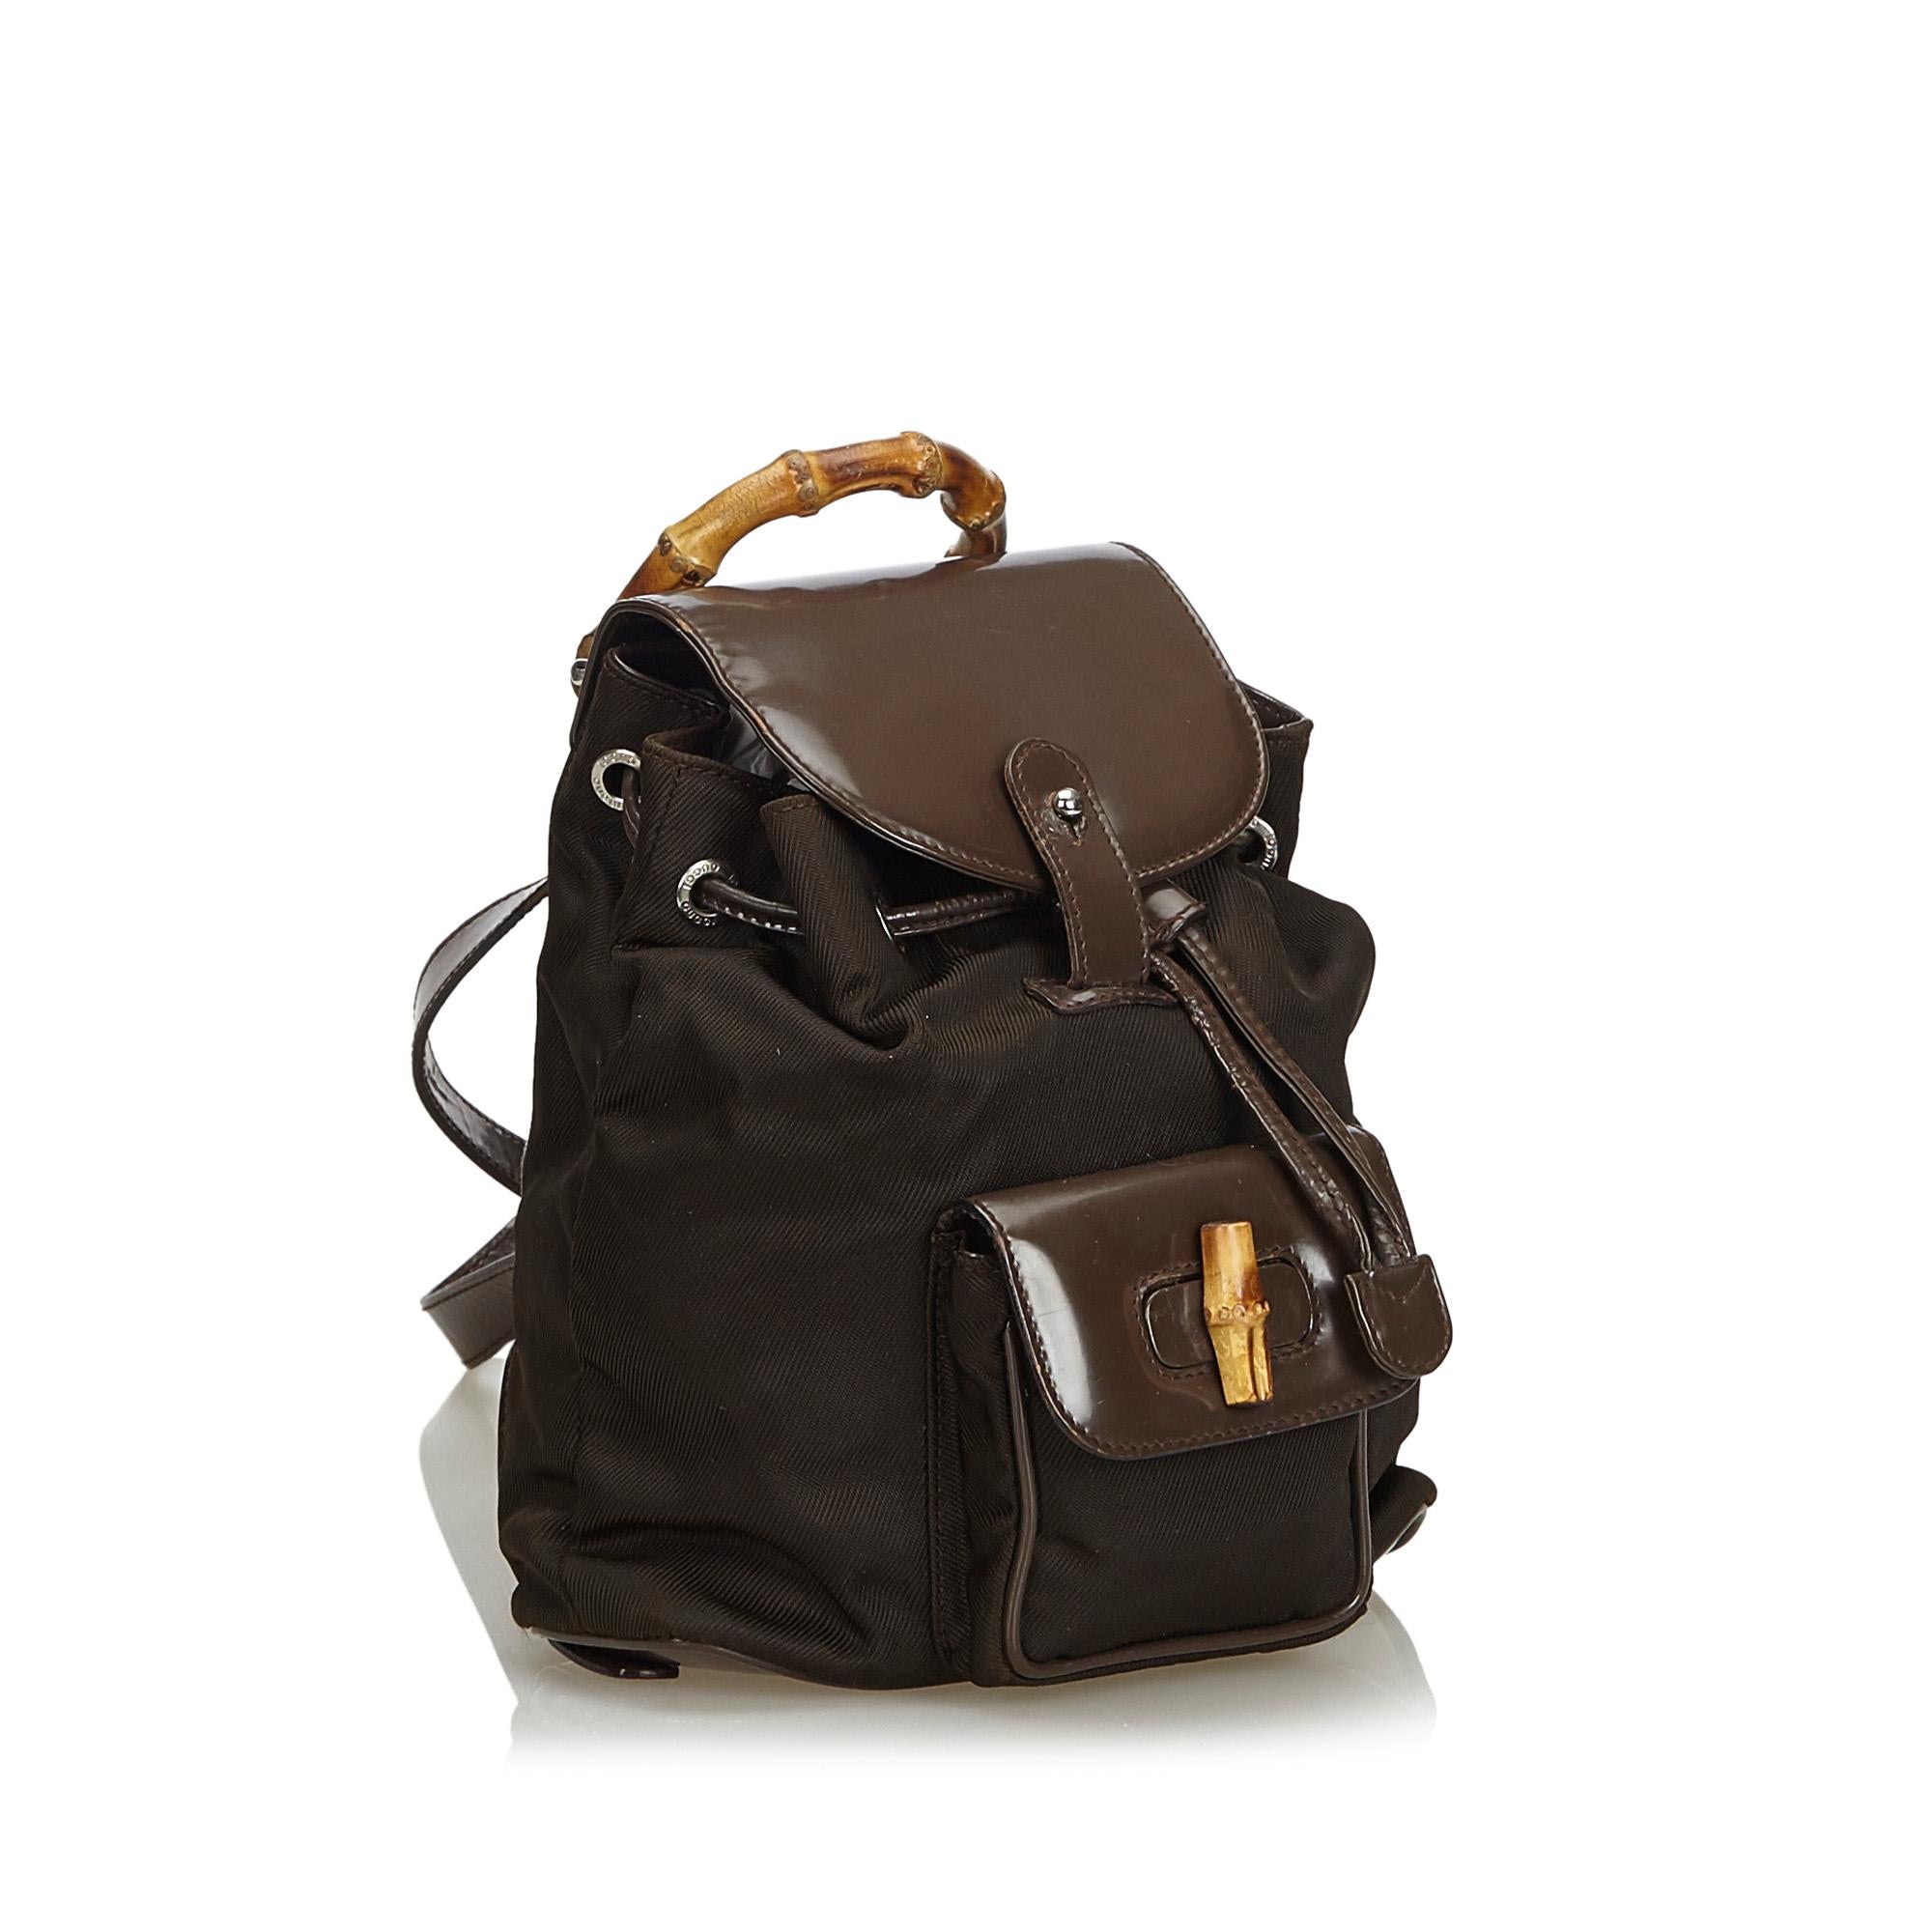 This backpack features a nylon body with leather trim, an exterior front flap pocket with bamboo twist lock closure, flat leather back straps, a bamboo top handle, top flap with buckle closure, drawstring closure, and an interior zip pocket. It